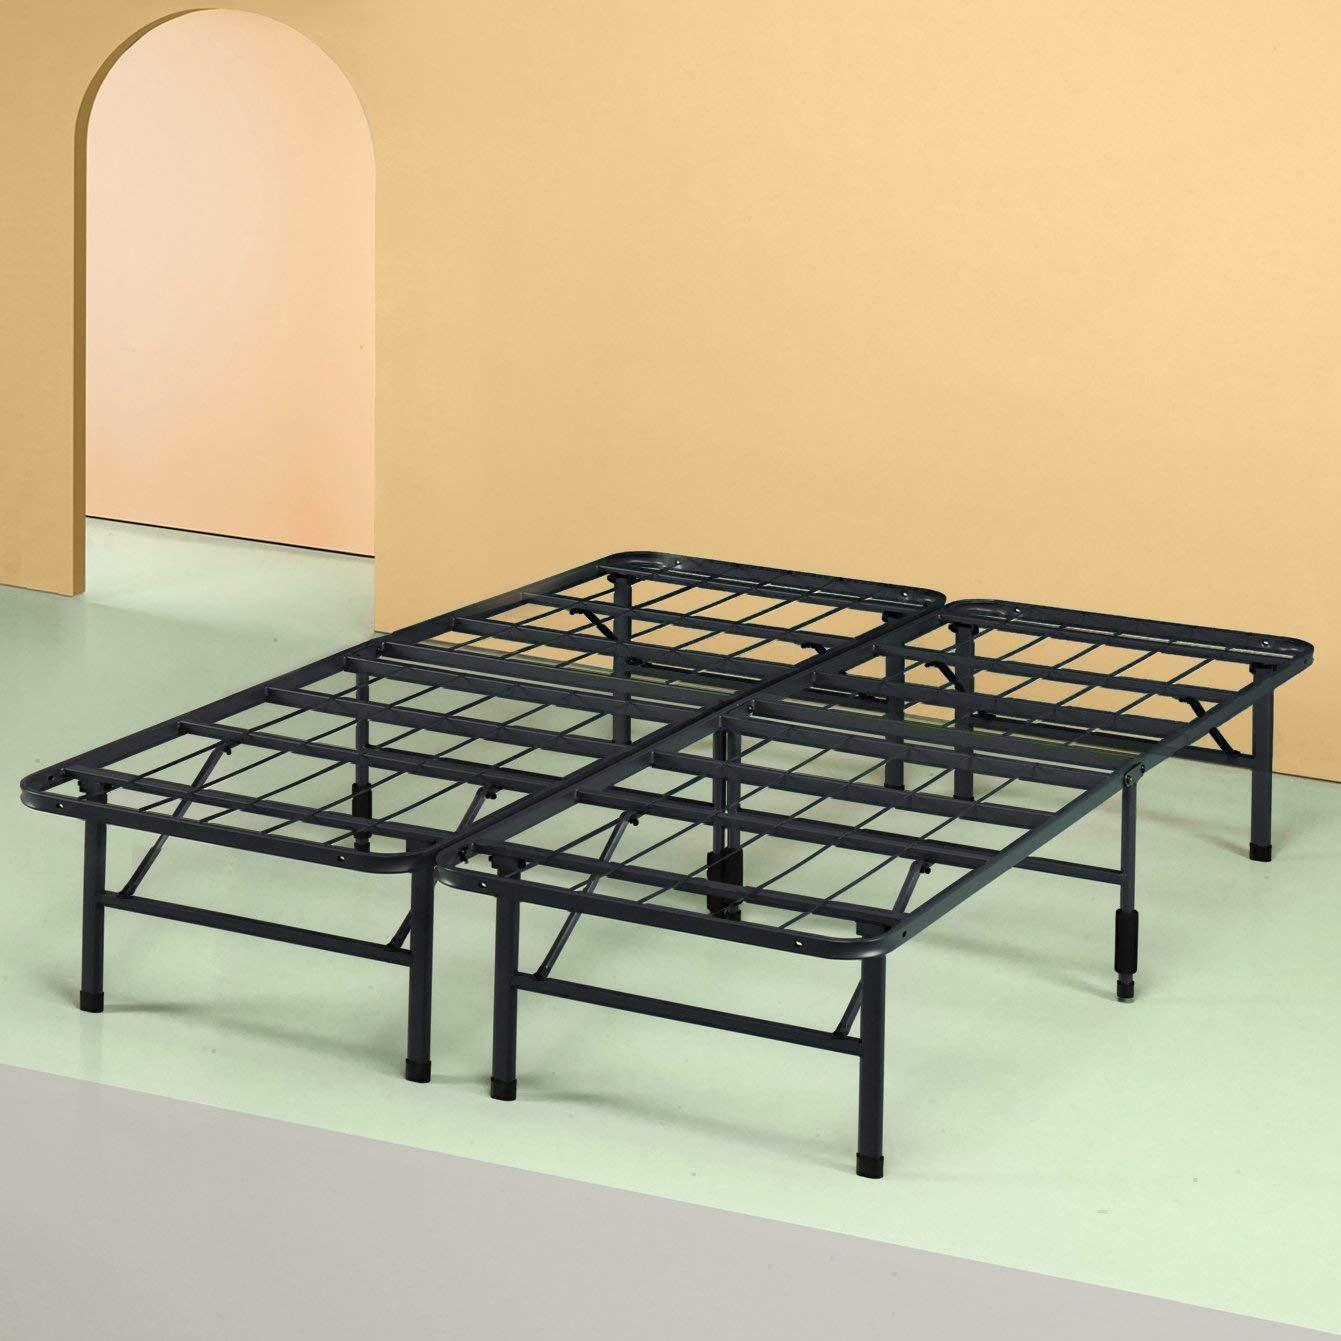 19 Best Metal Bed Frames 2022 The, How To Fix A Sagging Metal Bed Frame